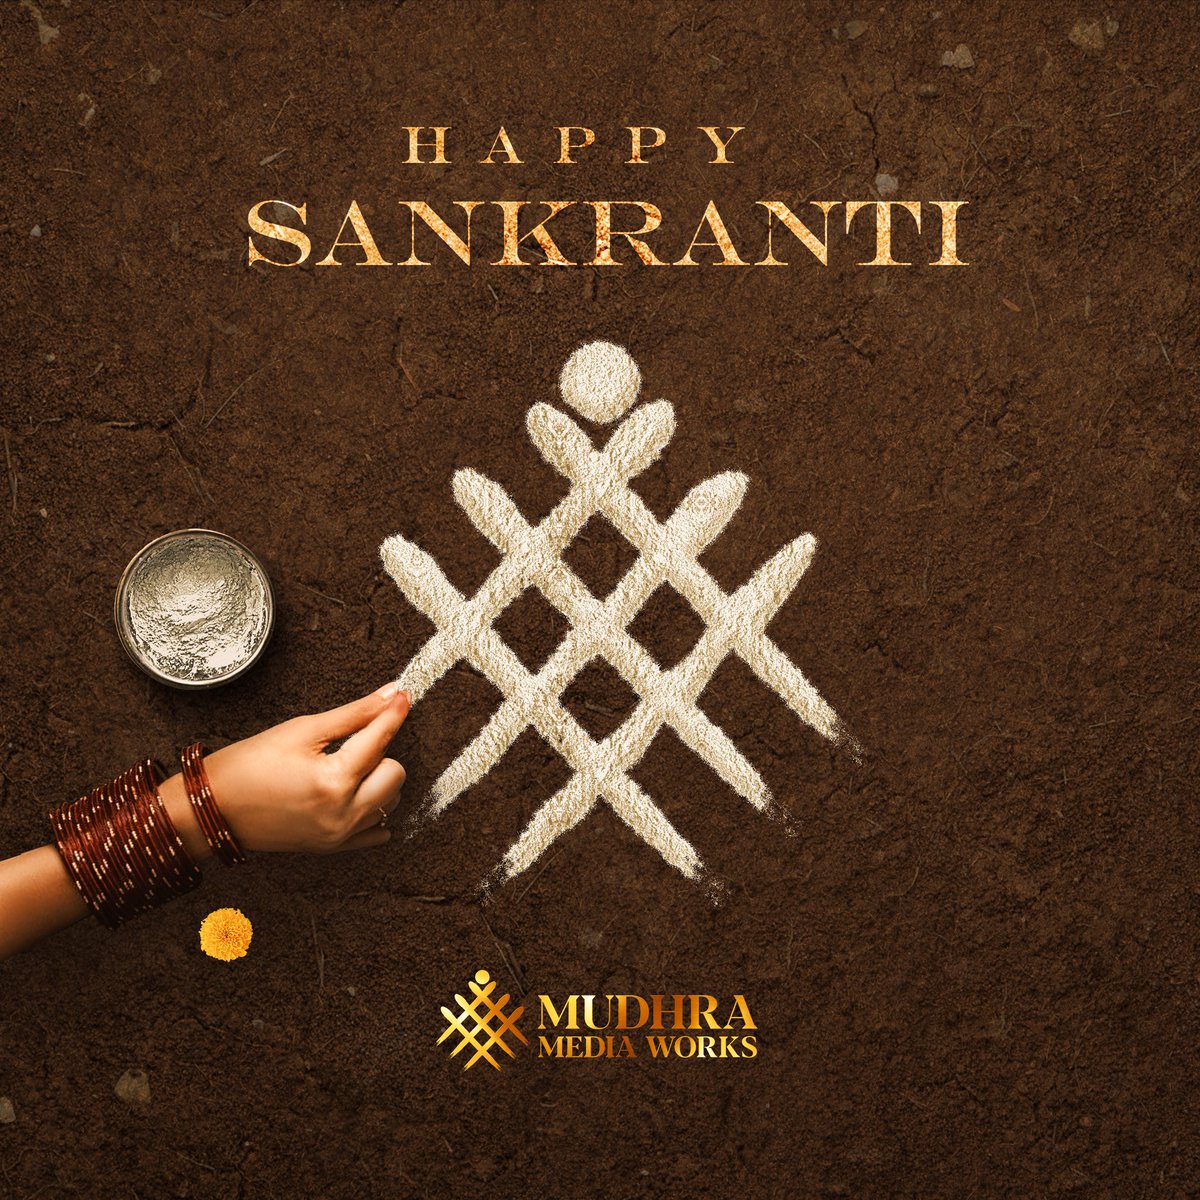 The joy of festival is multiplied when celebrated with loved ones 😇 May your family be blessed with happiness and harmony. #HappySankranti #HappyPongal